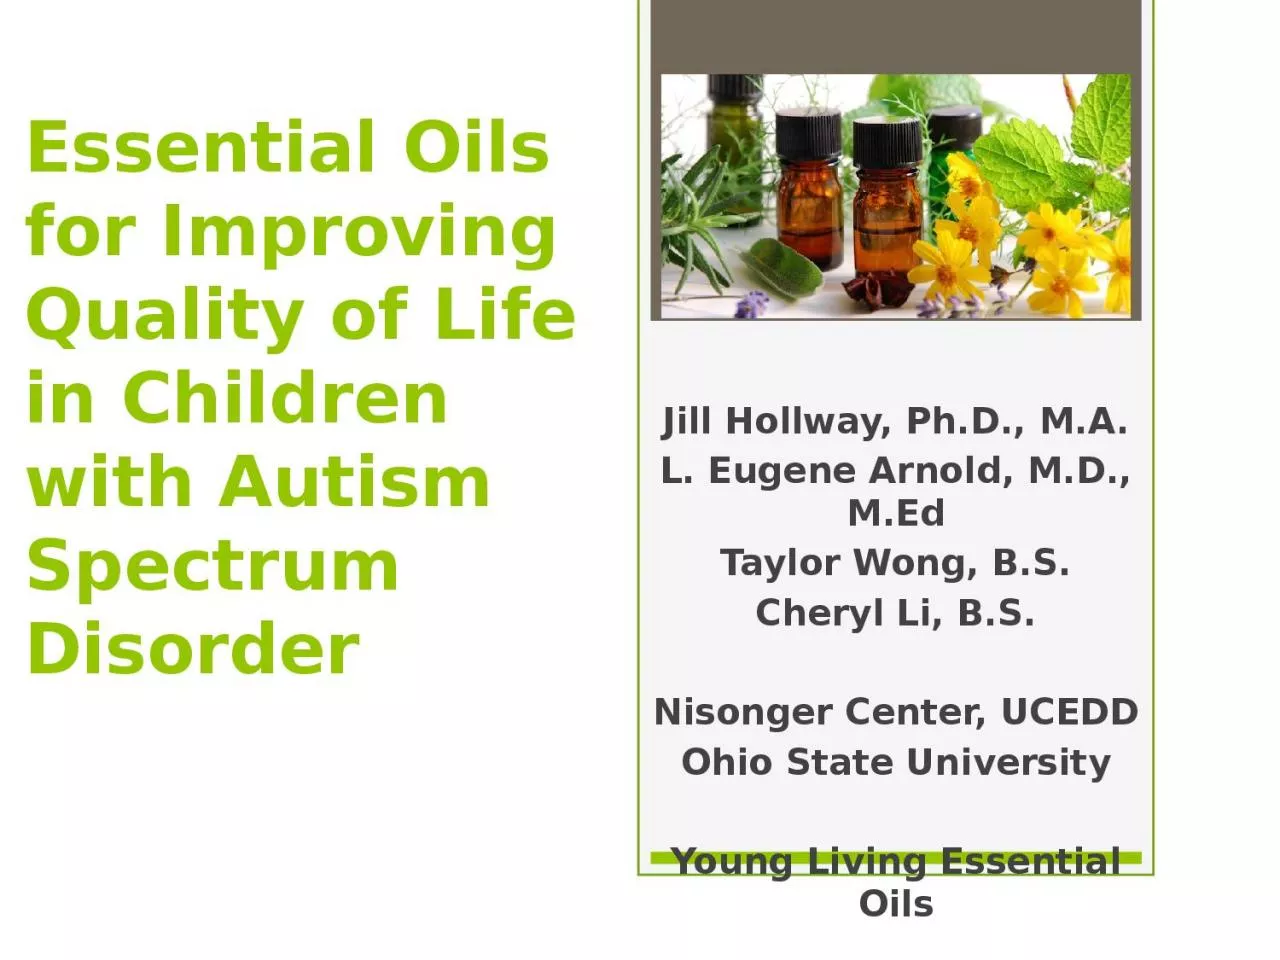 Essential Oils for Improving Quality of Life in Children with Autism Spectrum Disorder